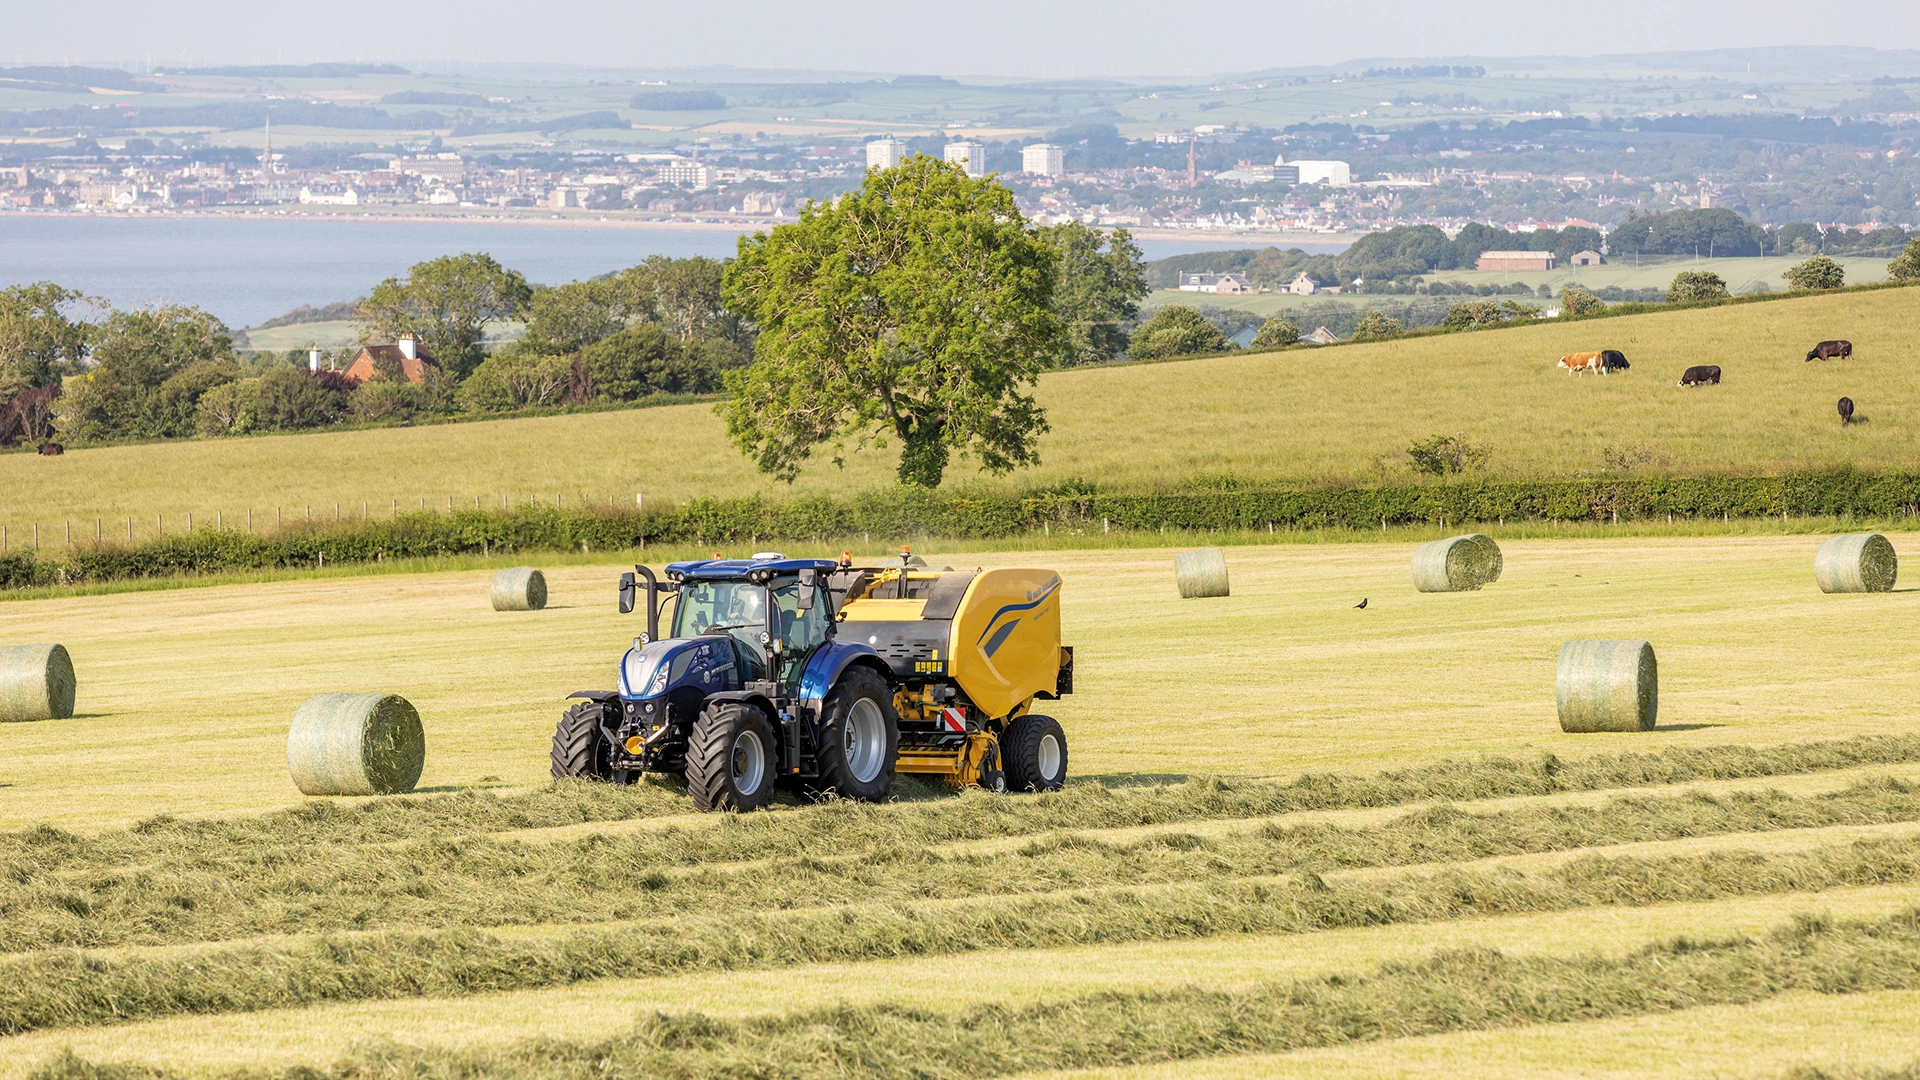 Farm tractor and Pro Belt round baler working in tandem, baling hay in the field